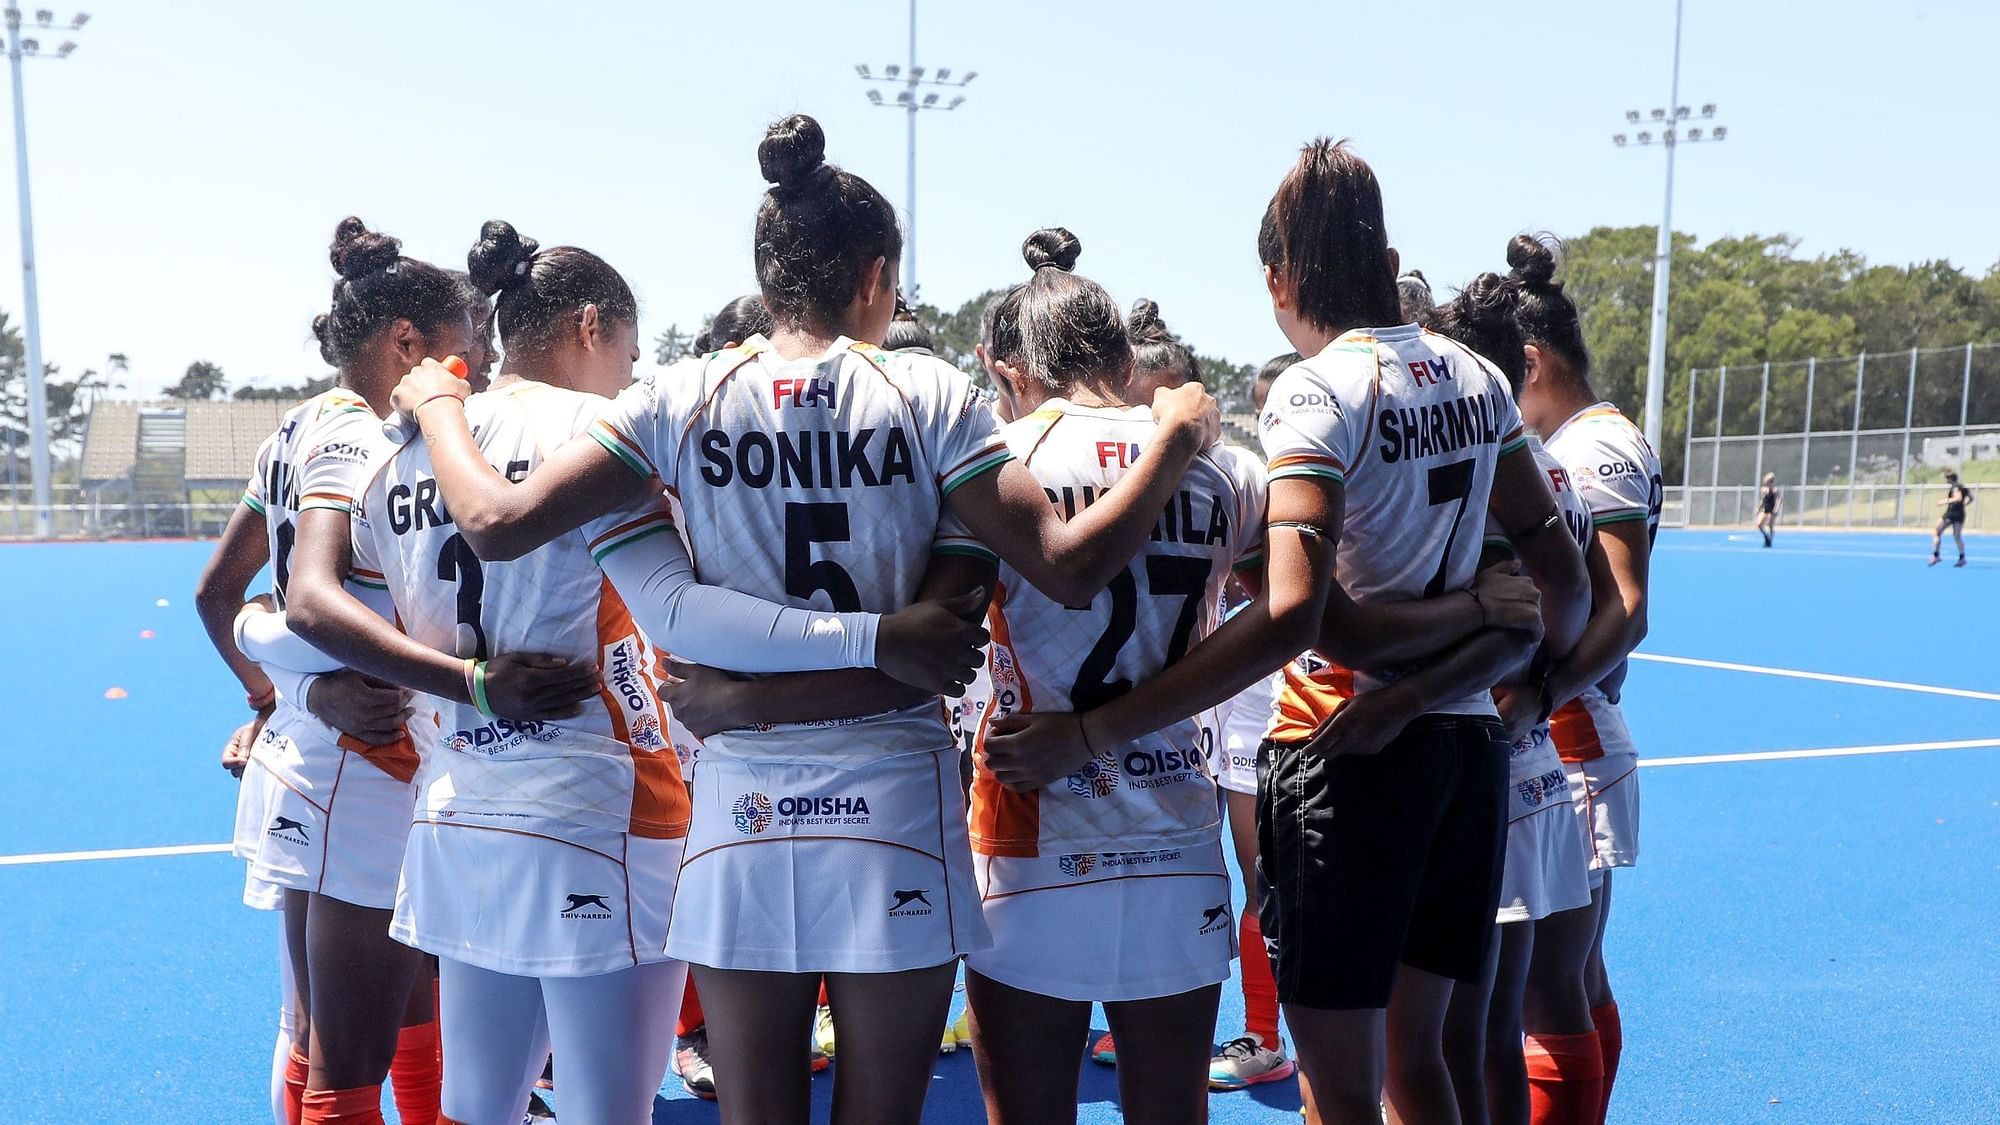 The Indian women’s hockey team has come up with a unique fundraiser to assist India’s fight against coronavirus.